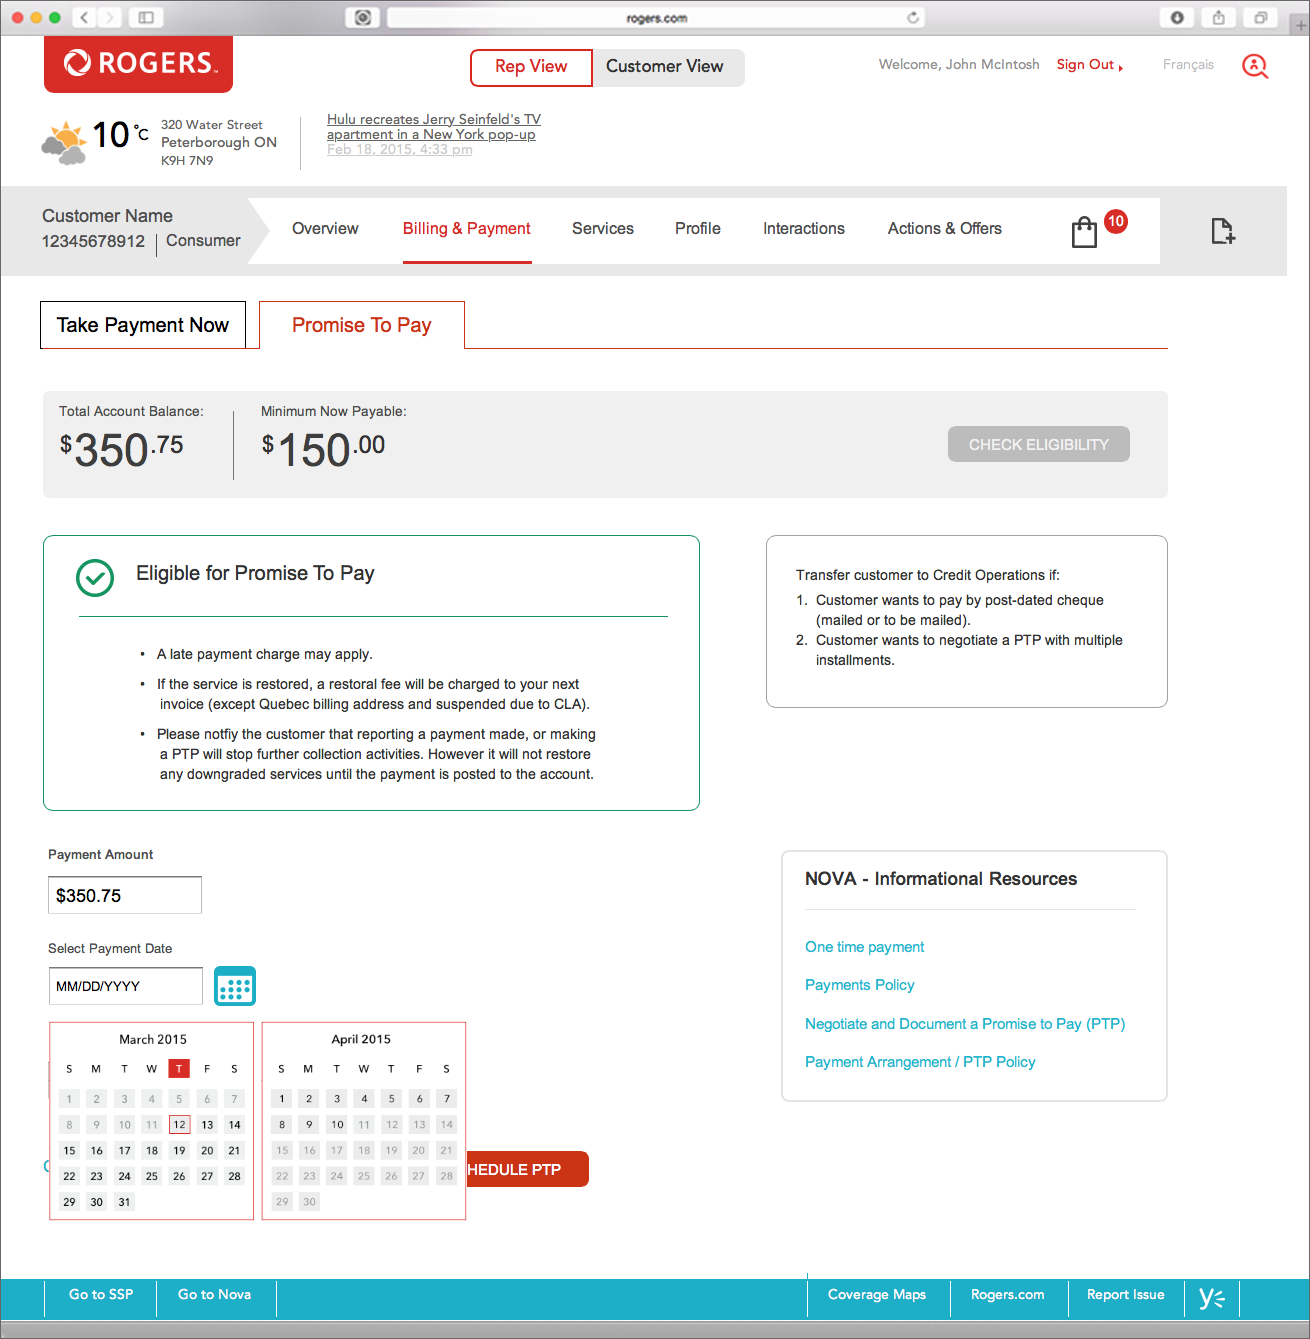 Rogers Interface Design